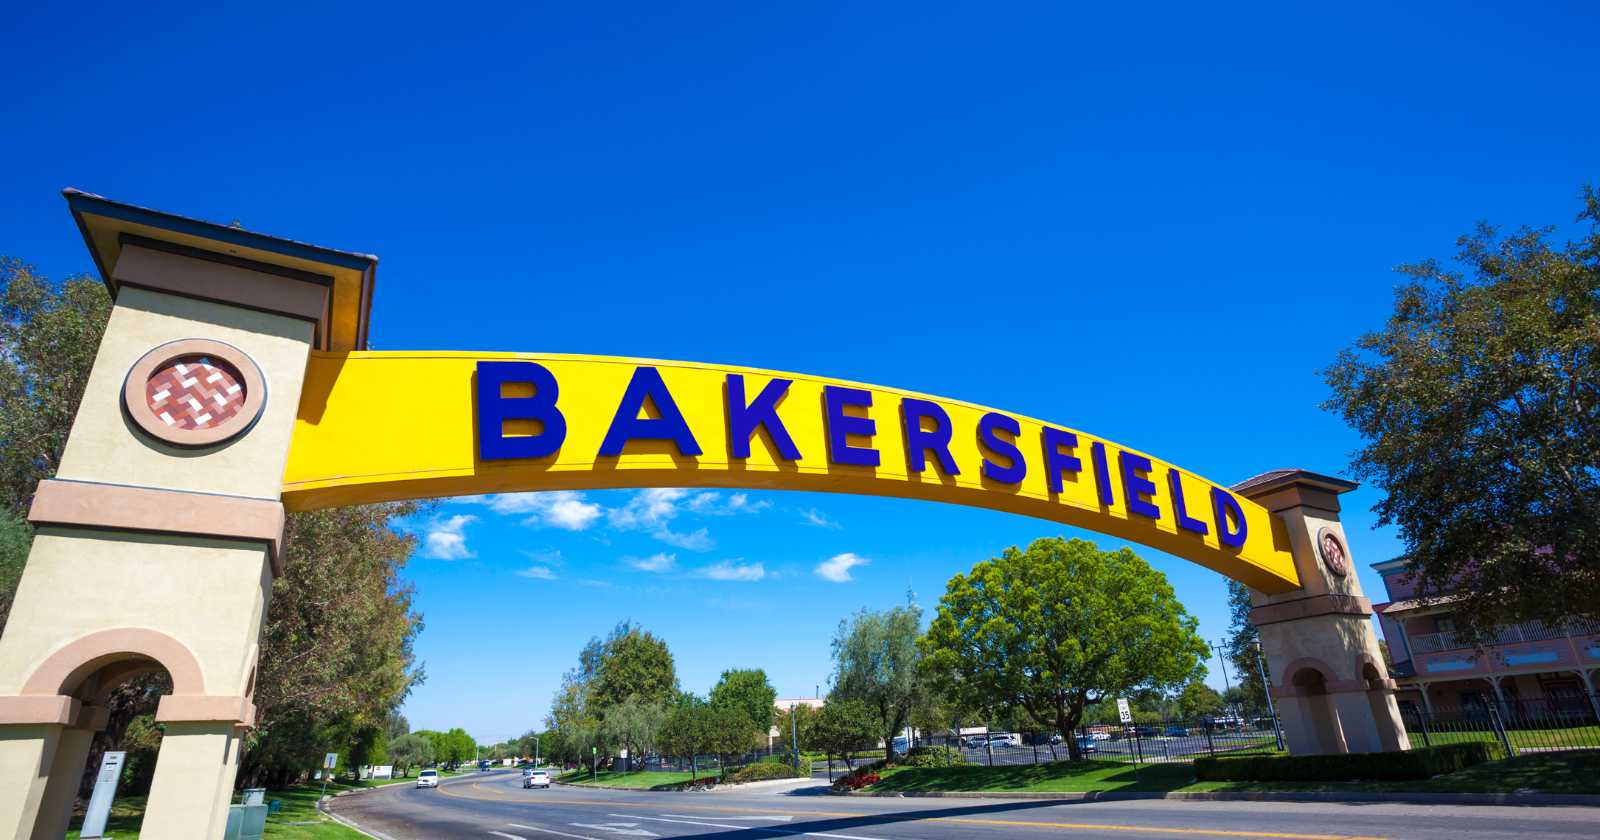 Bakersfield Neon Arch Sign